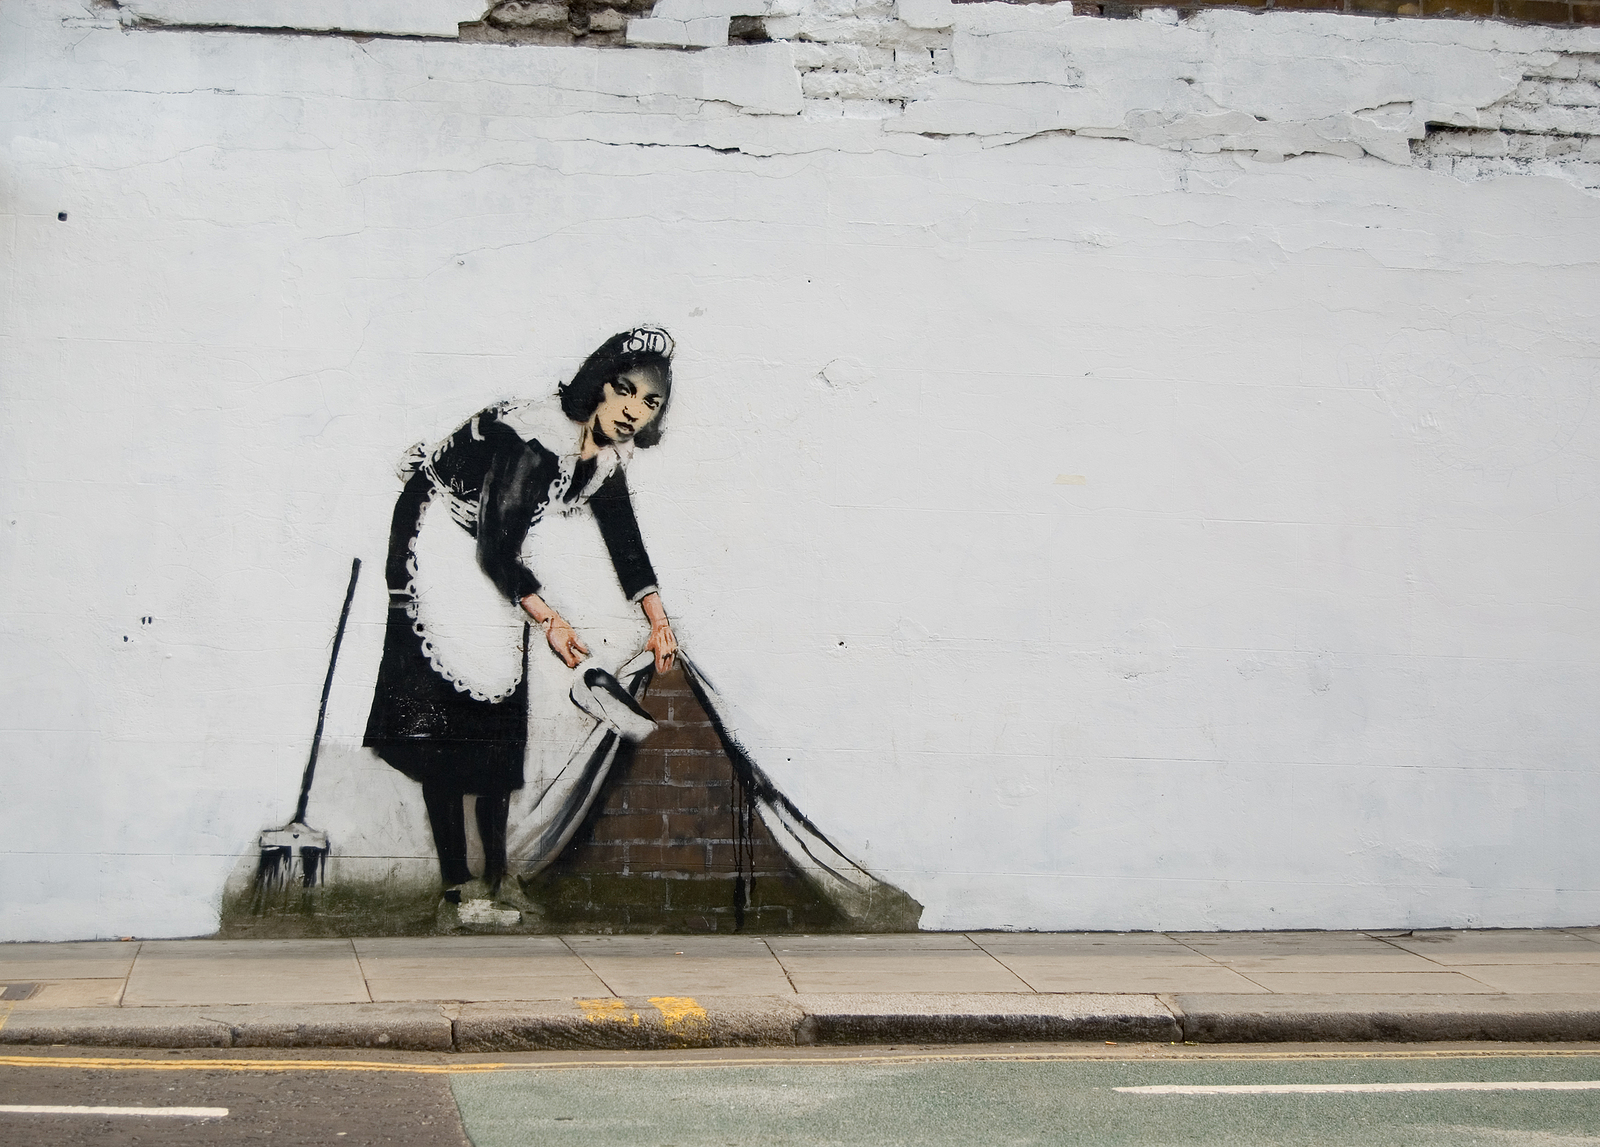 A Quick Introduction to Stencil Street Art: Banksy and Company